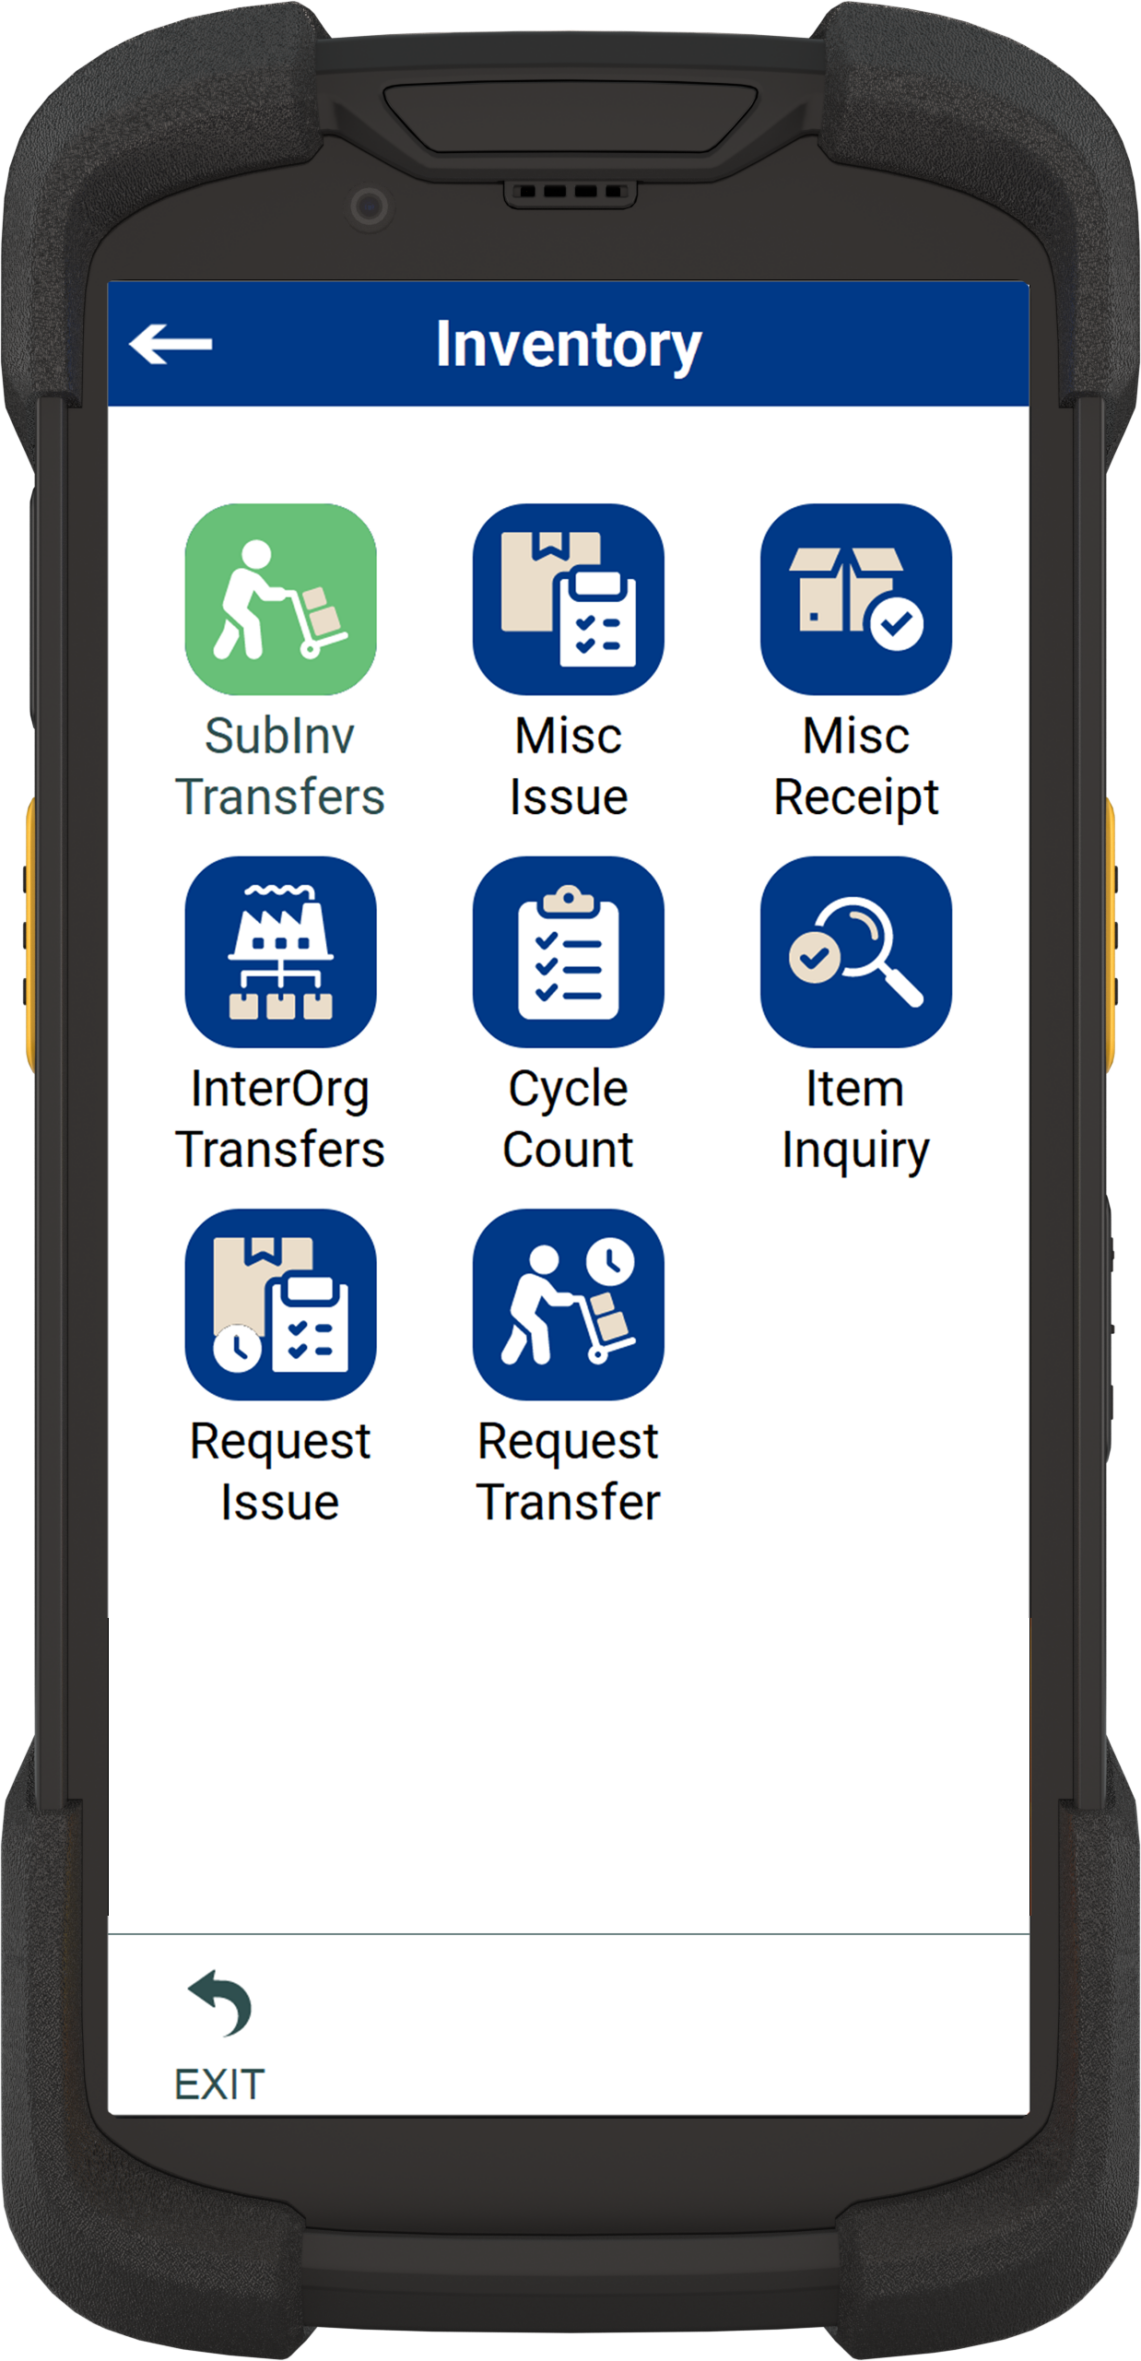 image of RFgen mobile device with mobile inventory management software, displaying a menu of mobile apps for supply chain transactions